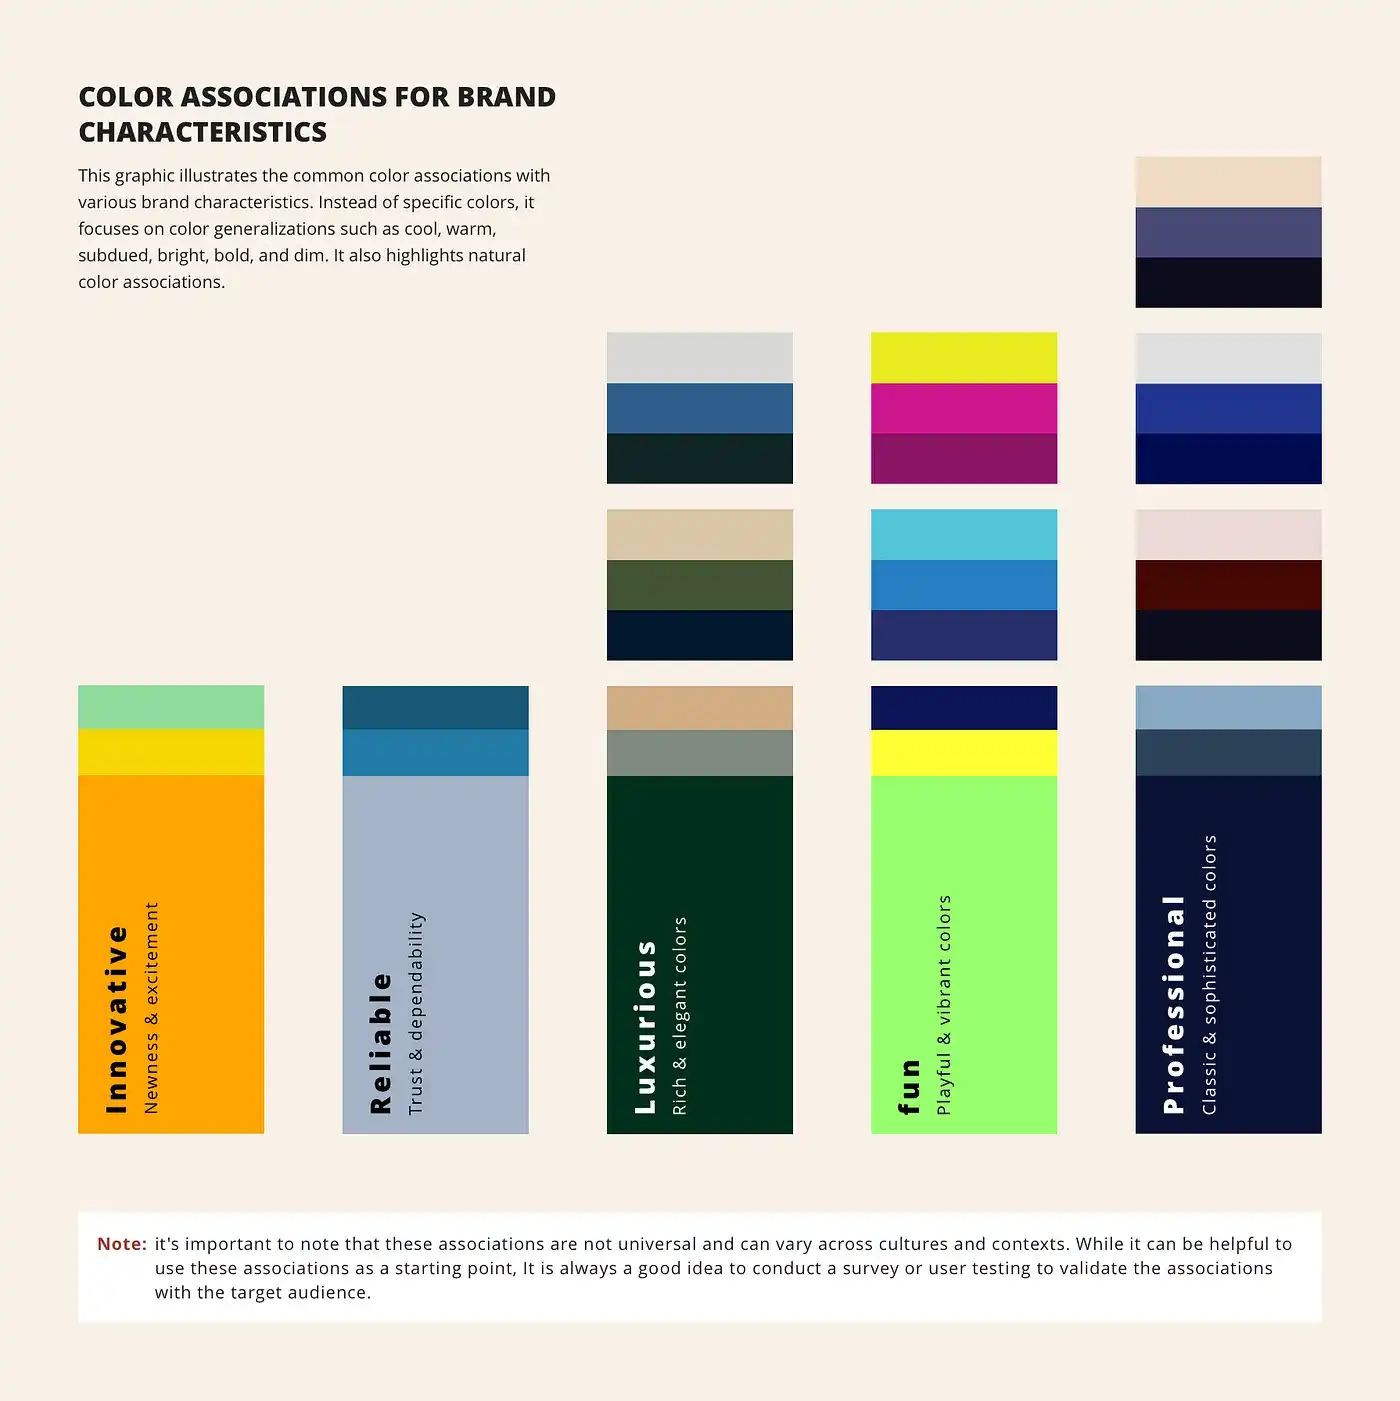 Graphic displaying various adjectives associated with different color generalizations, such as warm colors (orange and yellow) associated with innovation, cool colors (Blue) associated with reliability and subdued cool colors associated with professionalism in branding. Image by Naif Ekkeri from wowstudio.io